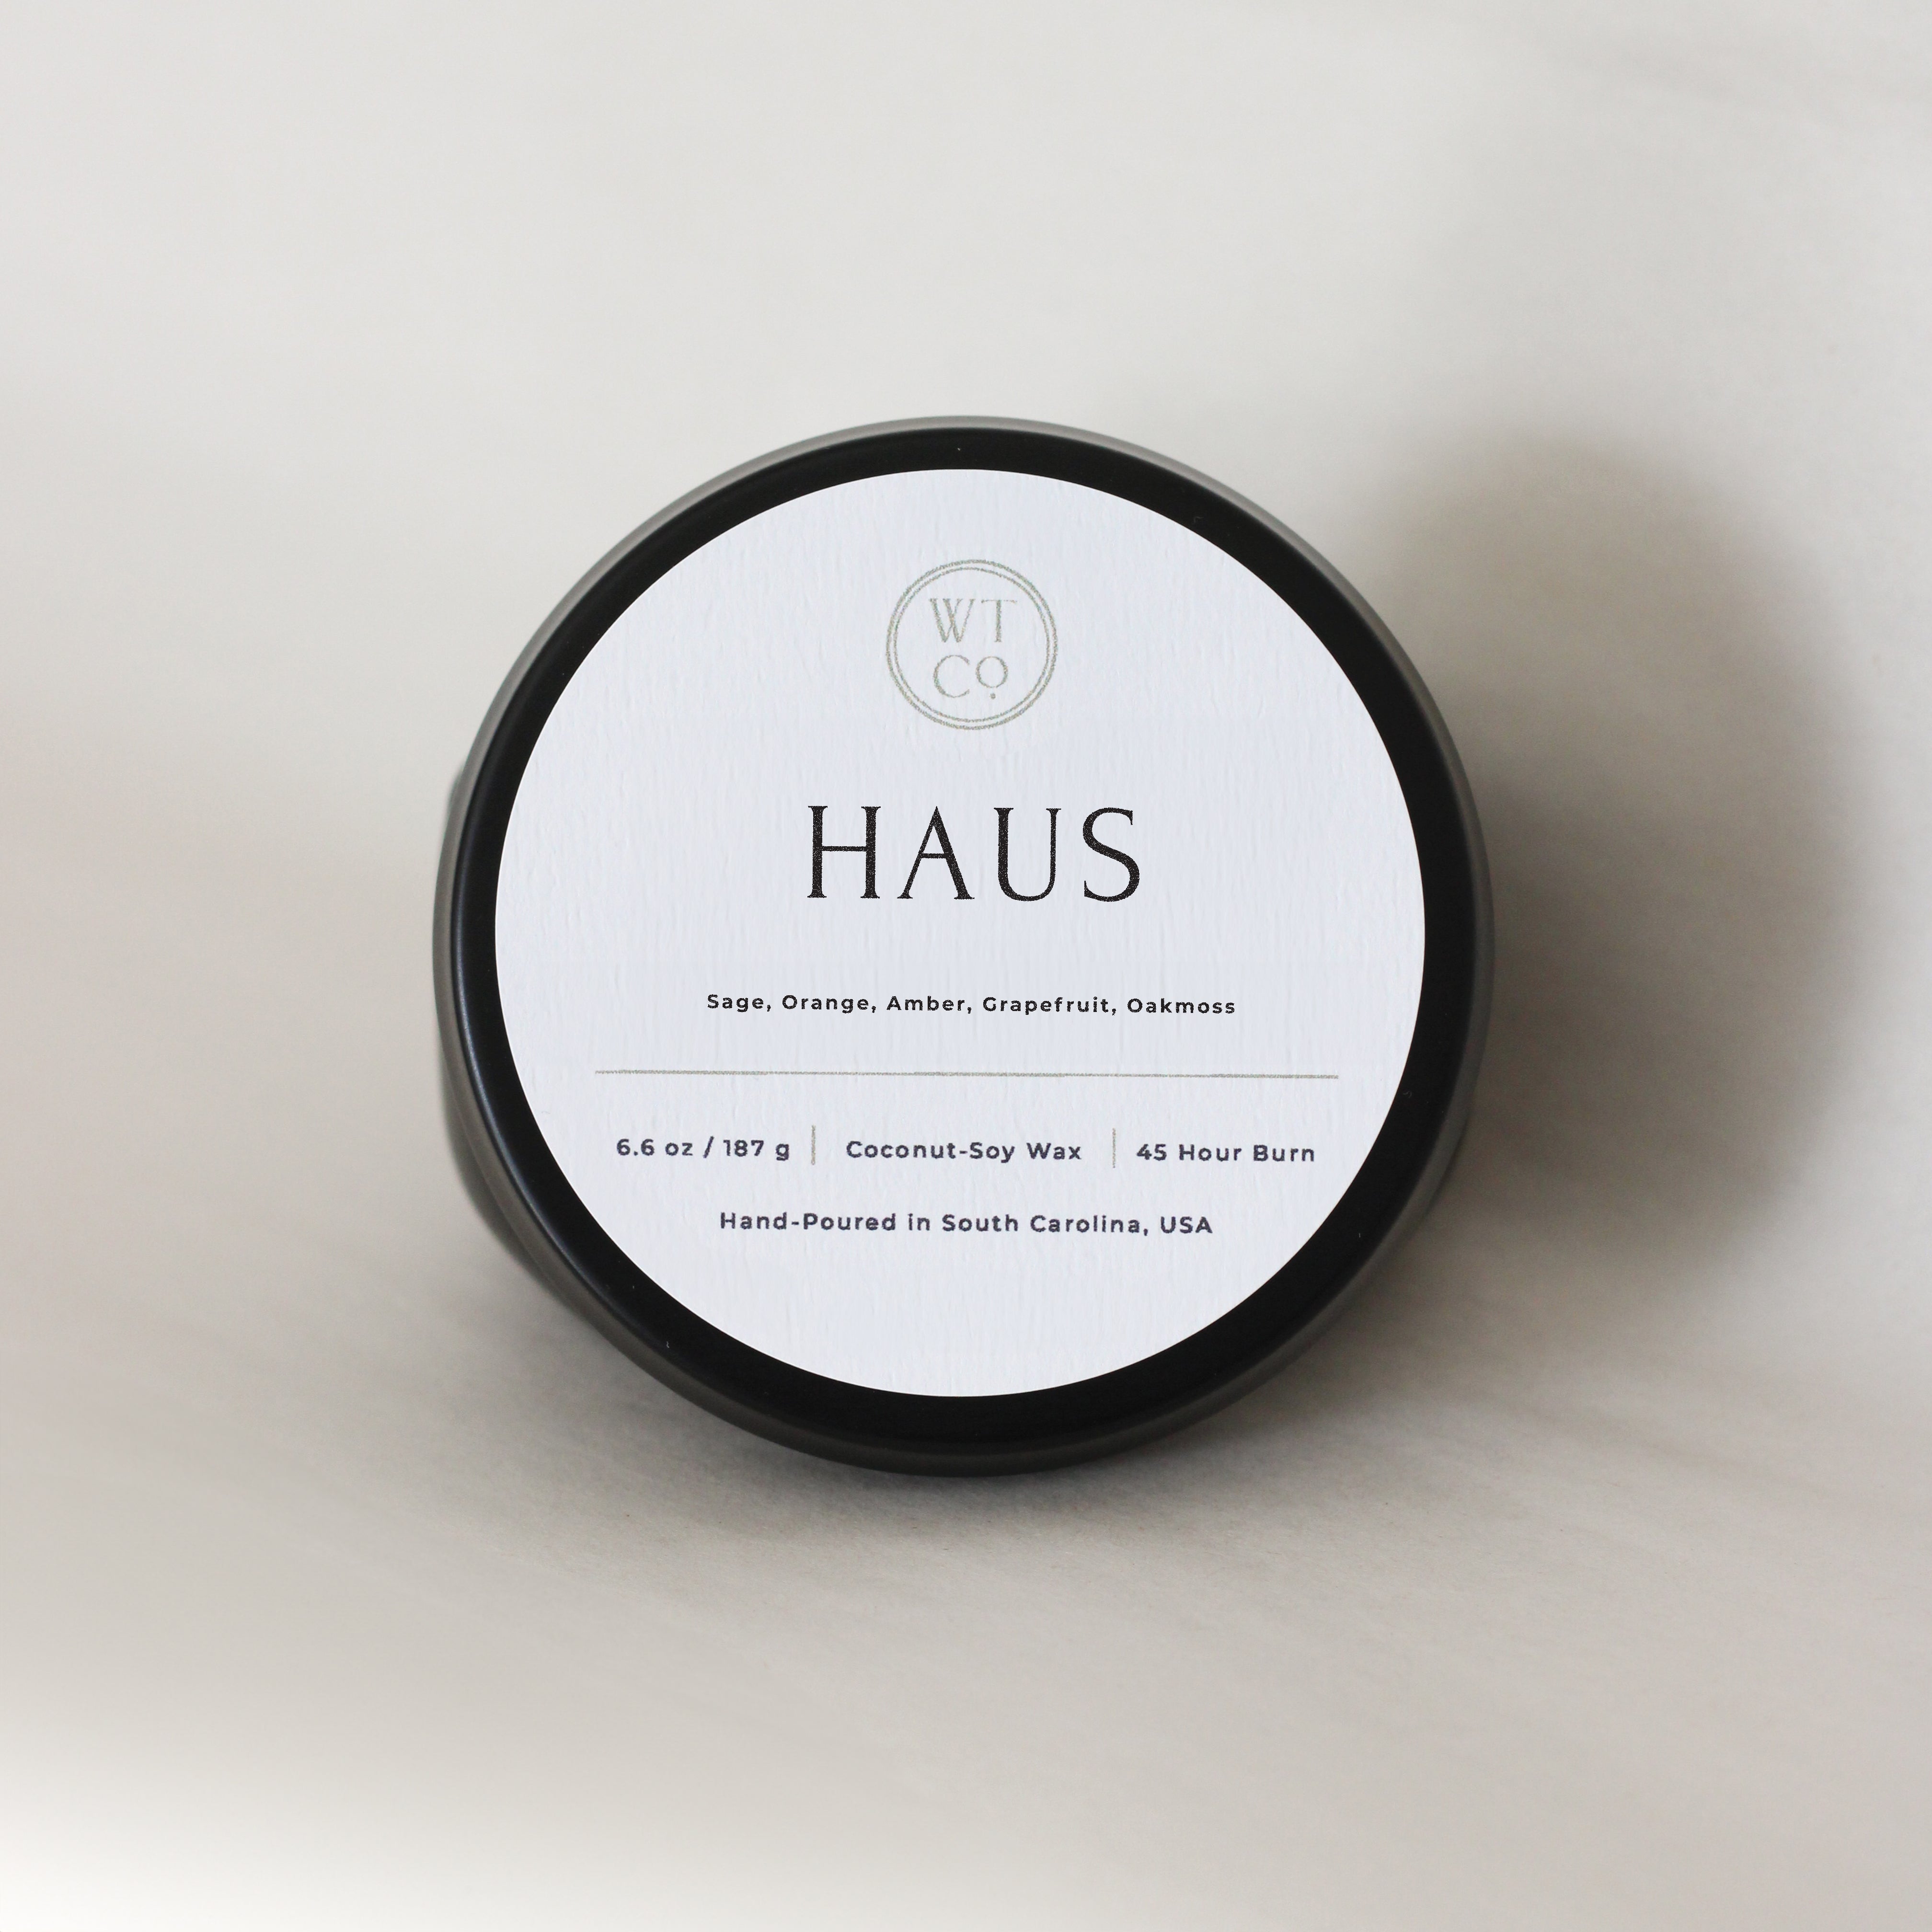 Haus Travel Tin | Well-Taylored Co.